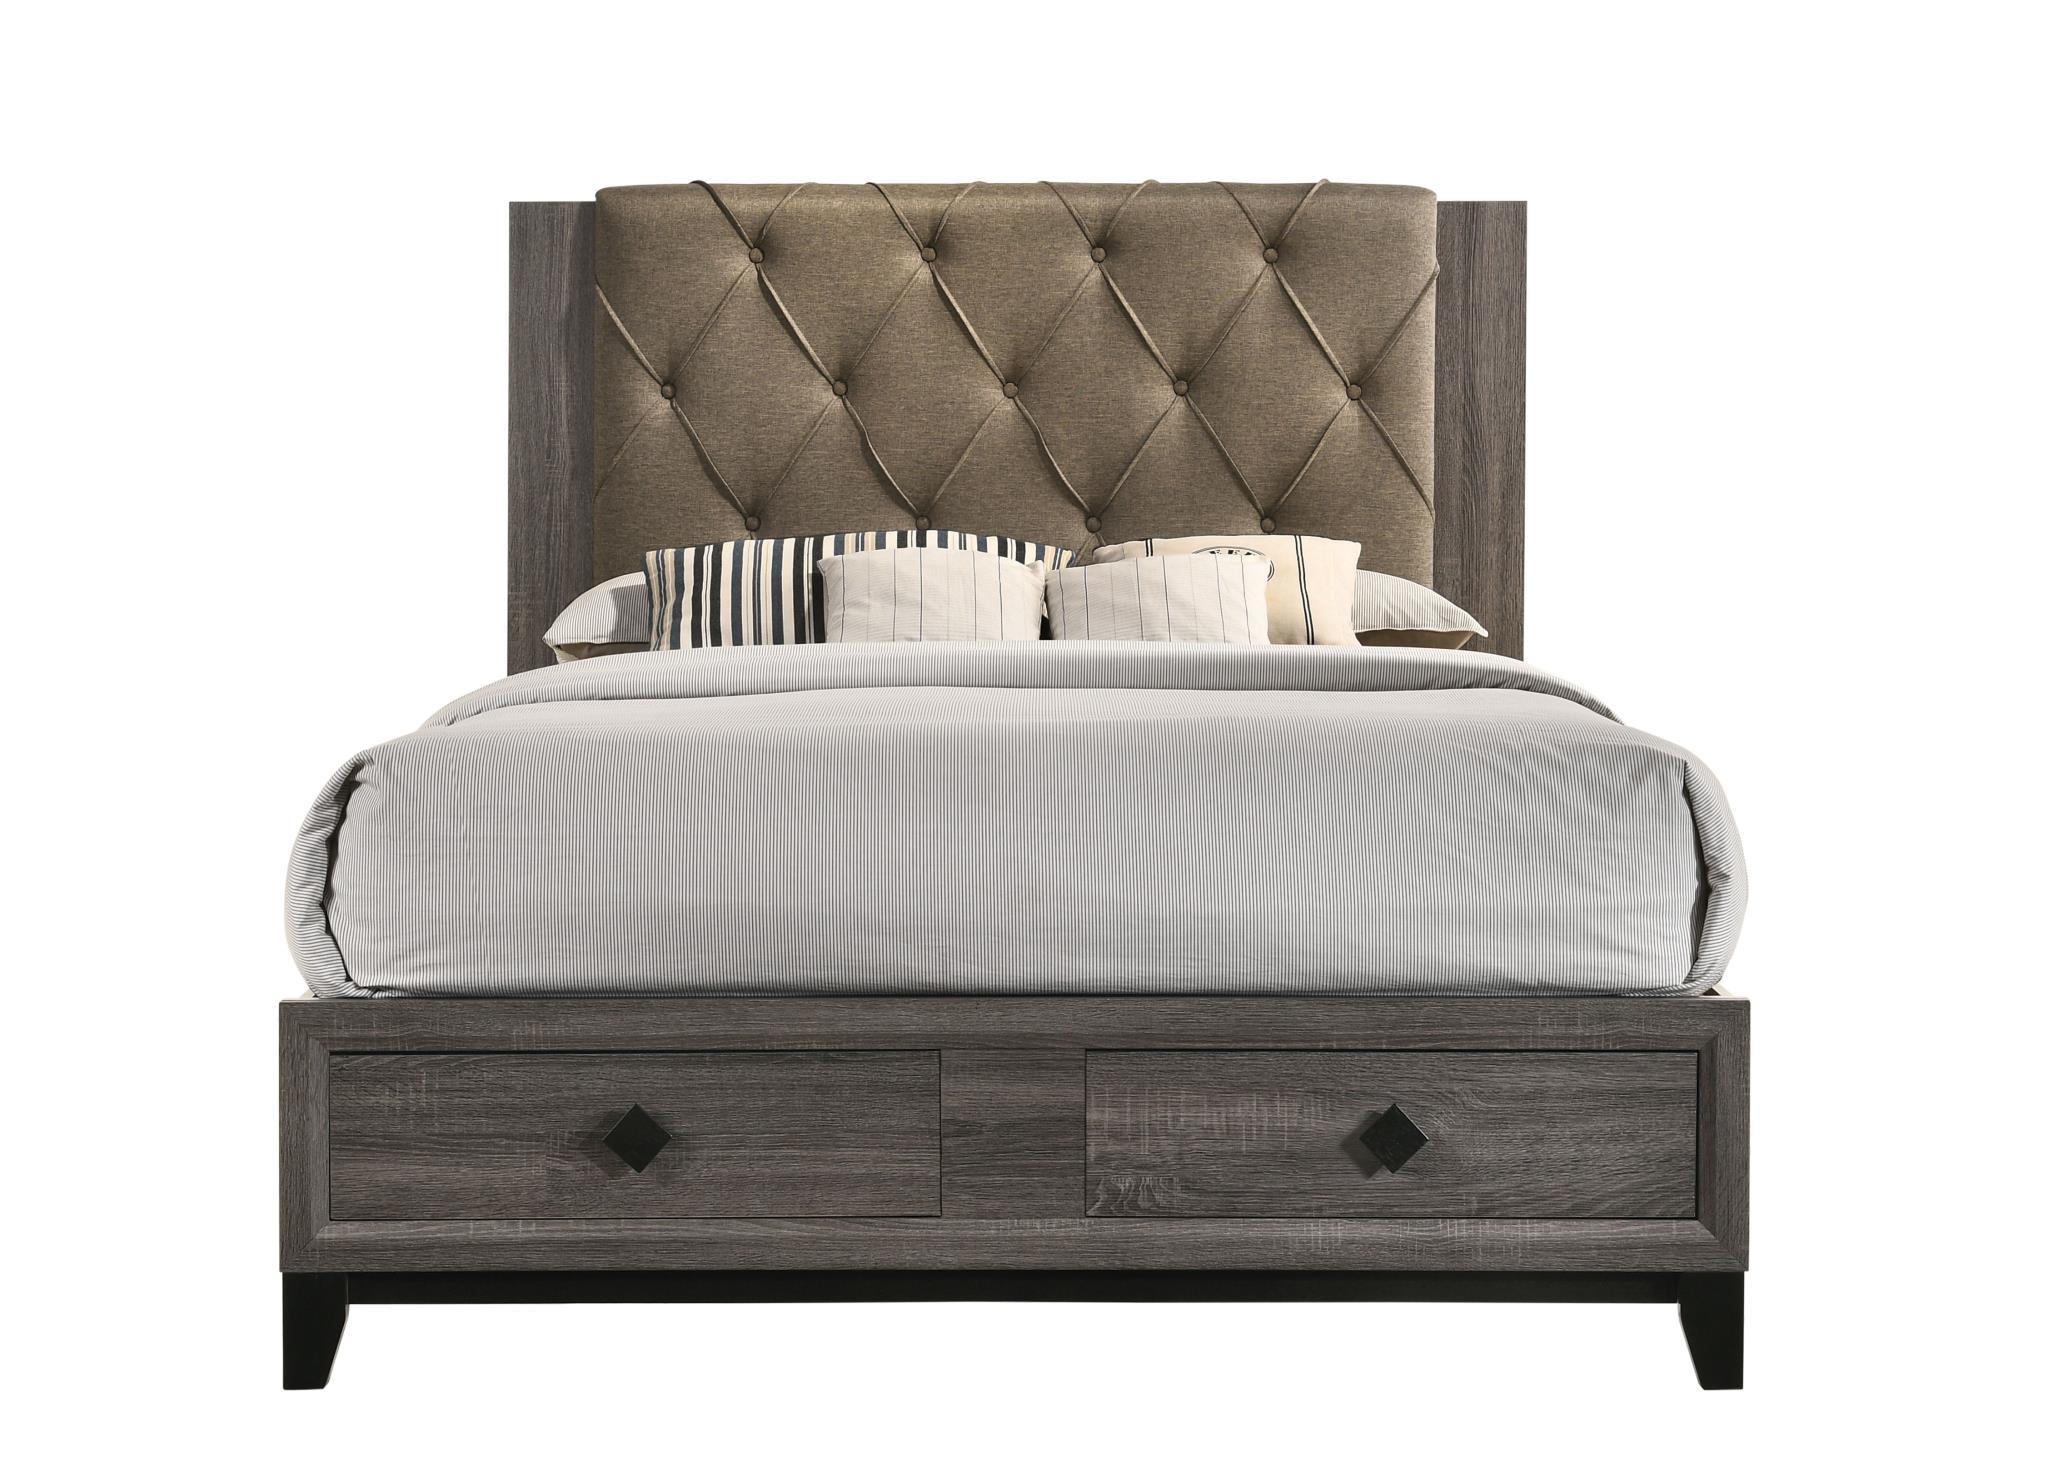 Transitional Storage Bed Avantika-27670Q 27670Q in Brown Oak and Grey Fabric